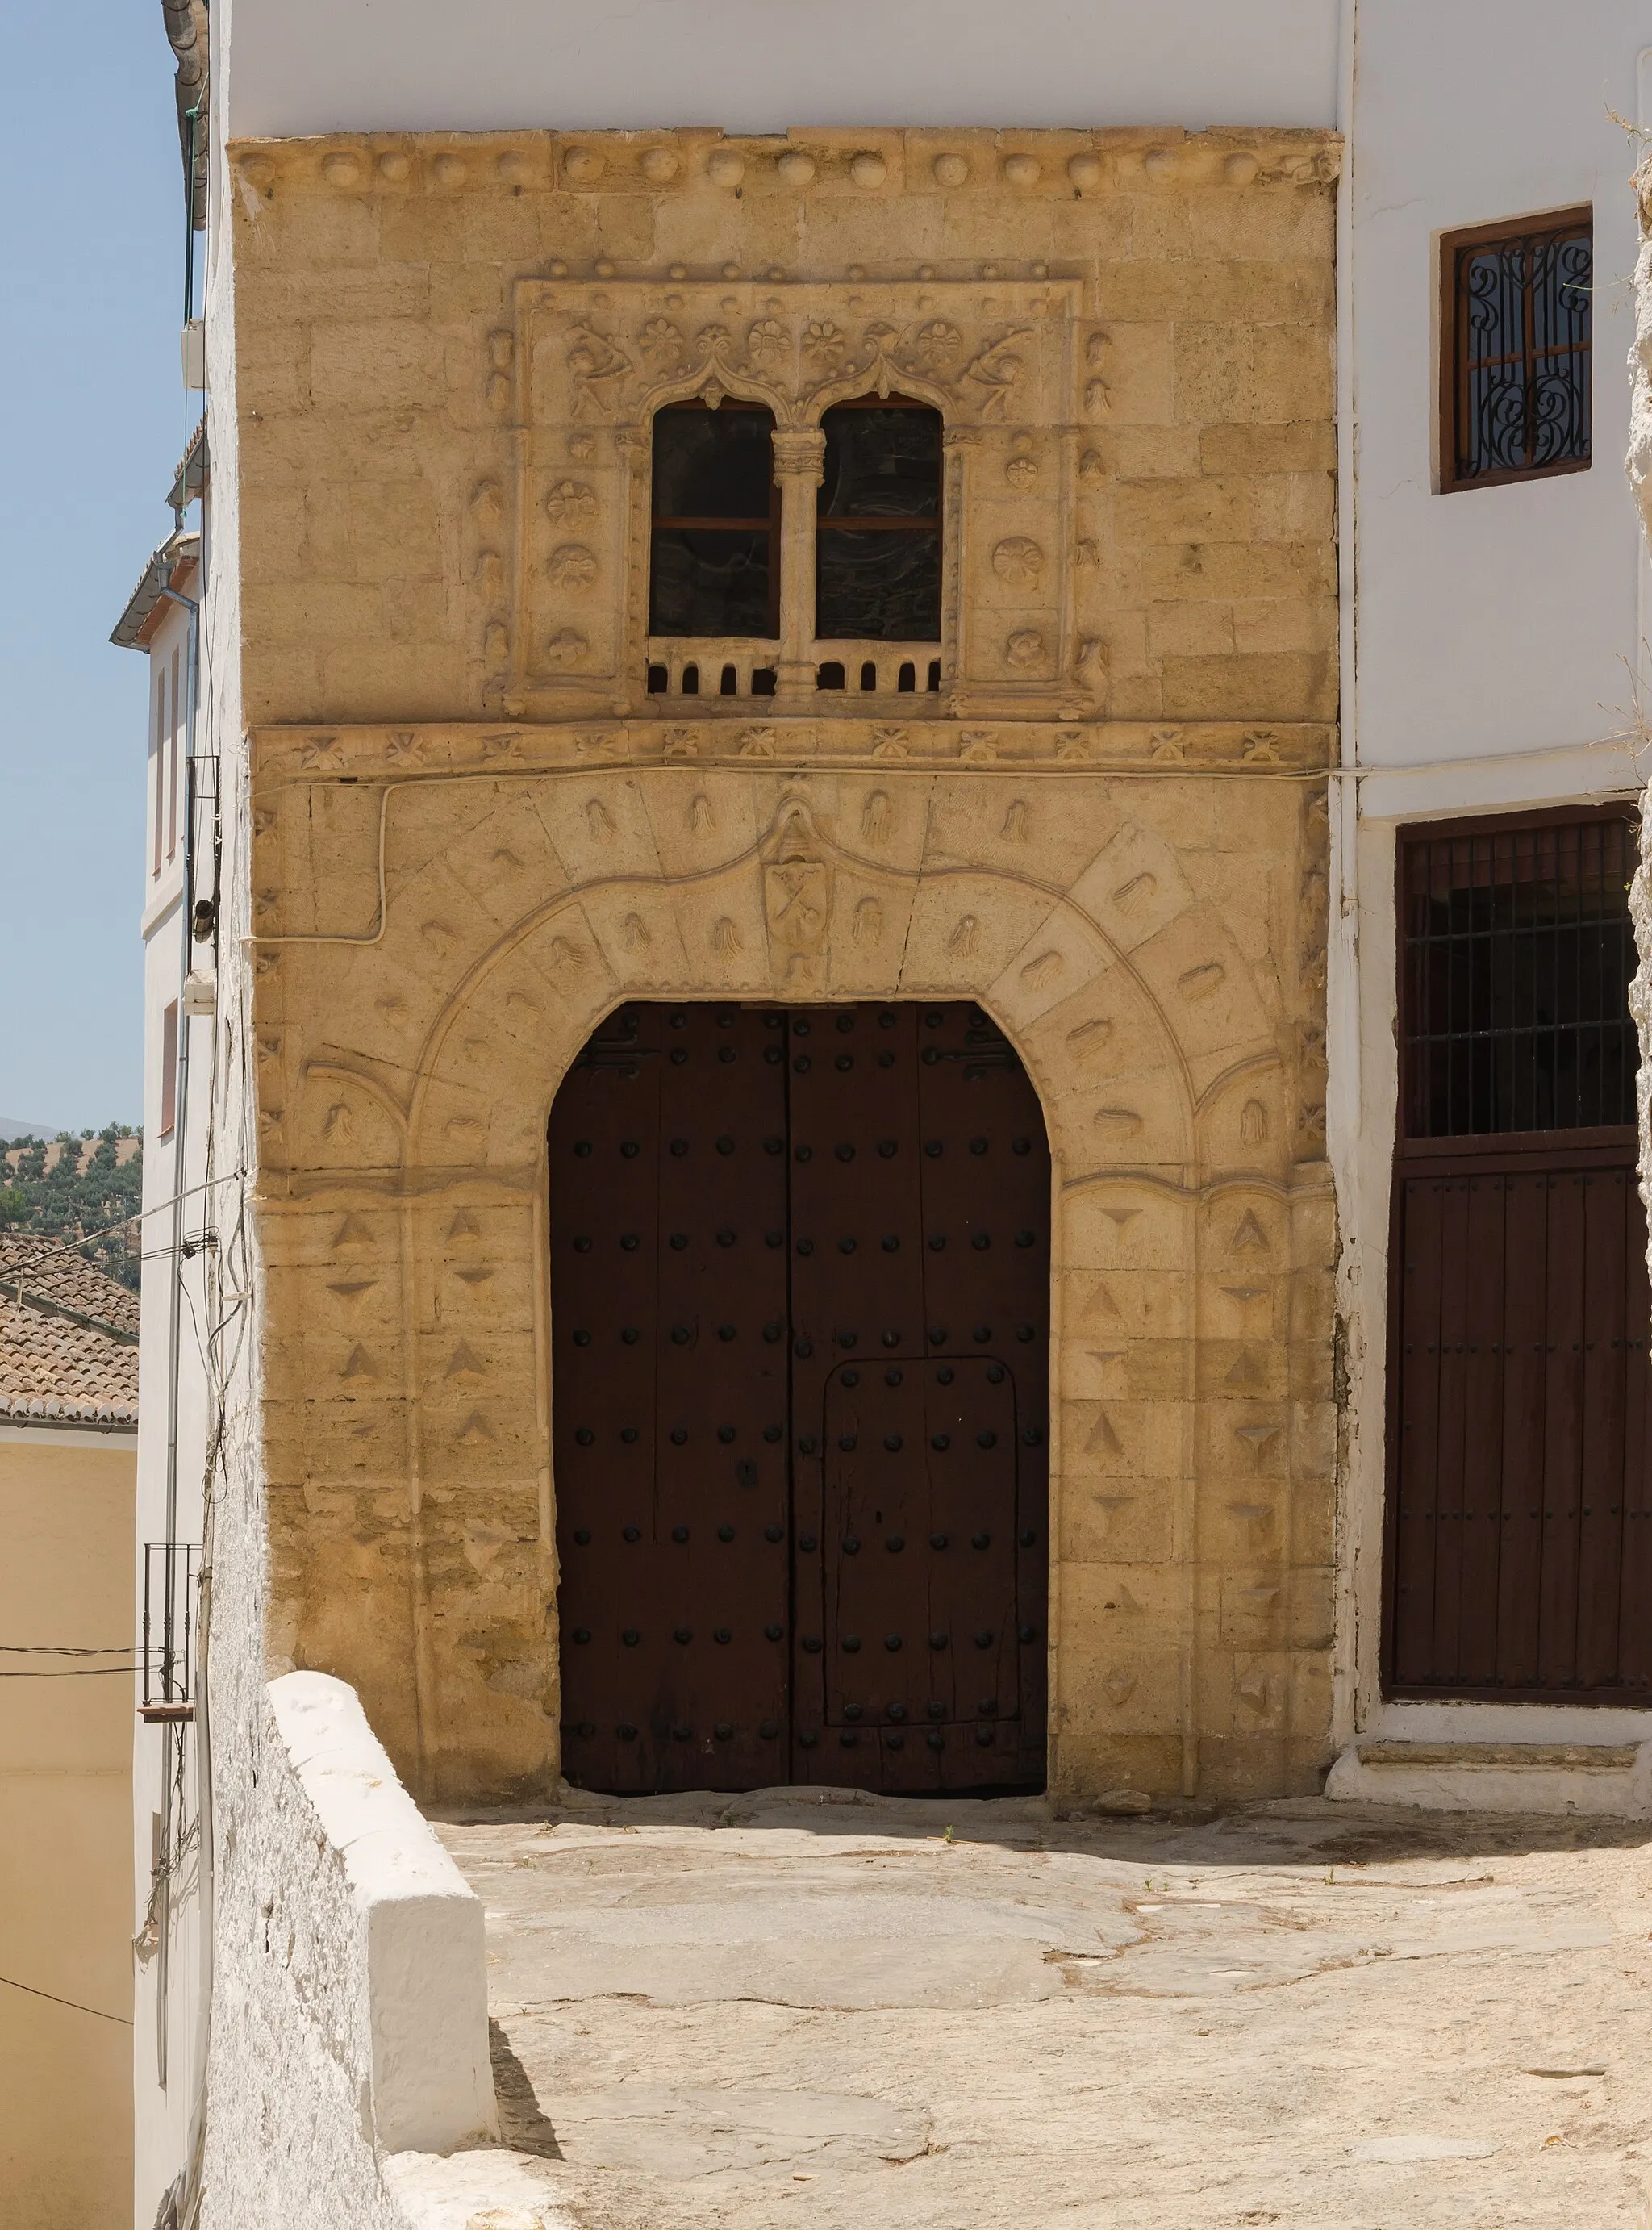 Photo showing: House of the Inquisition, entrance, Alhama de Granada, Granada, Spain. (this is a mythical name, Inquisition never worked here)